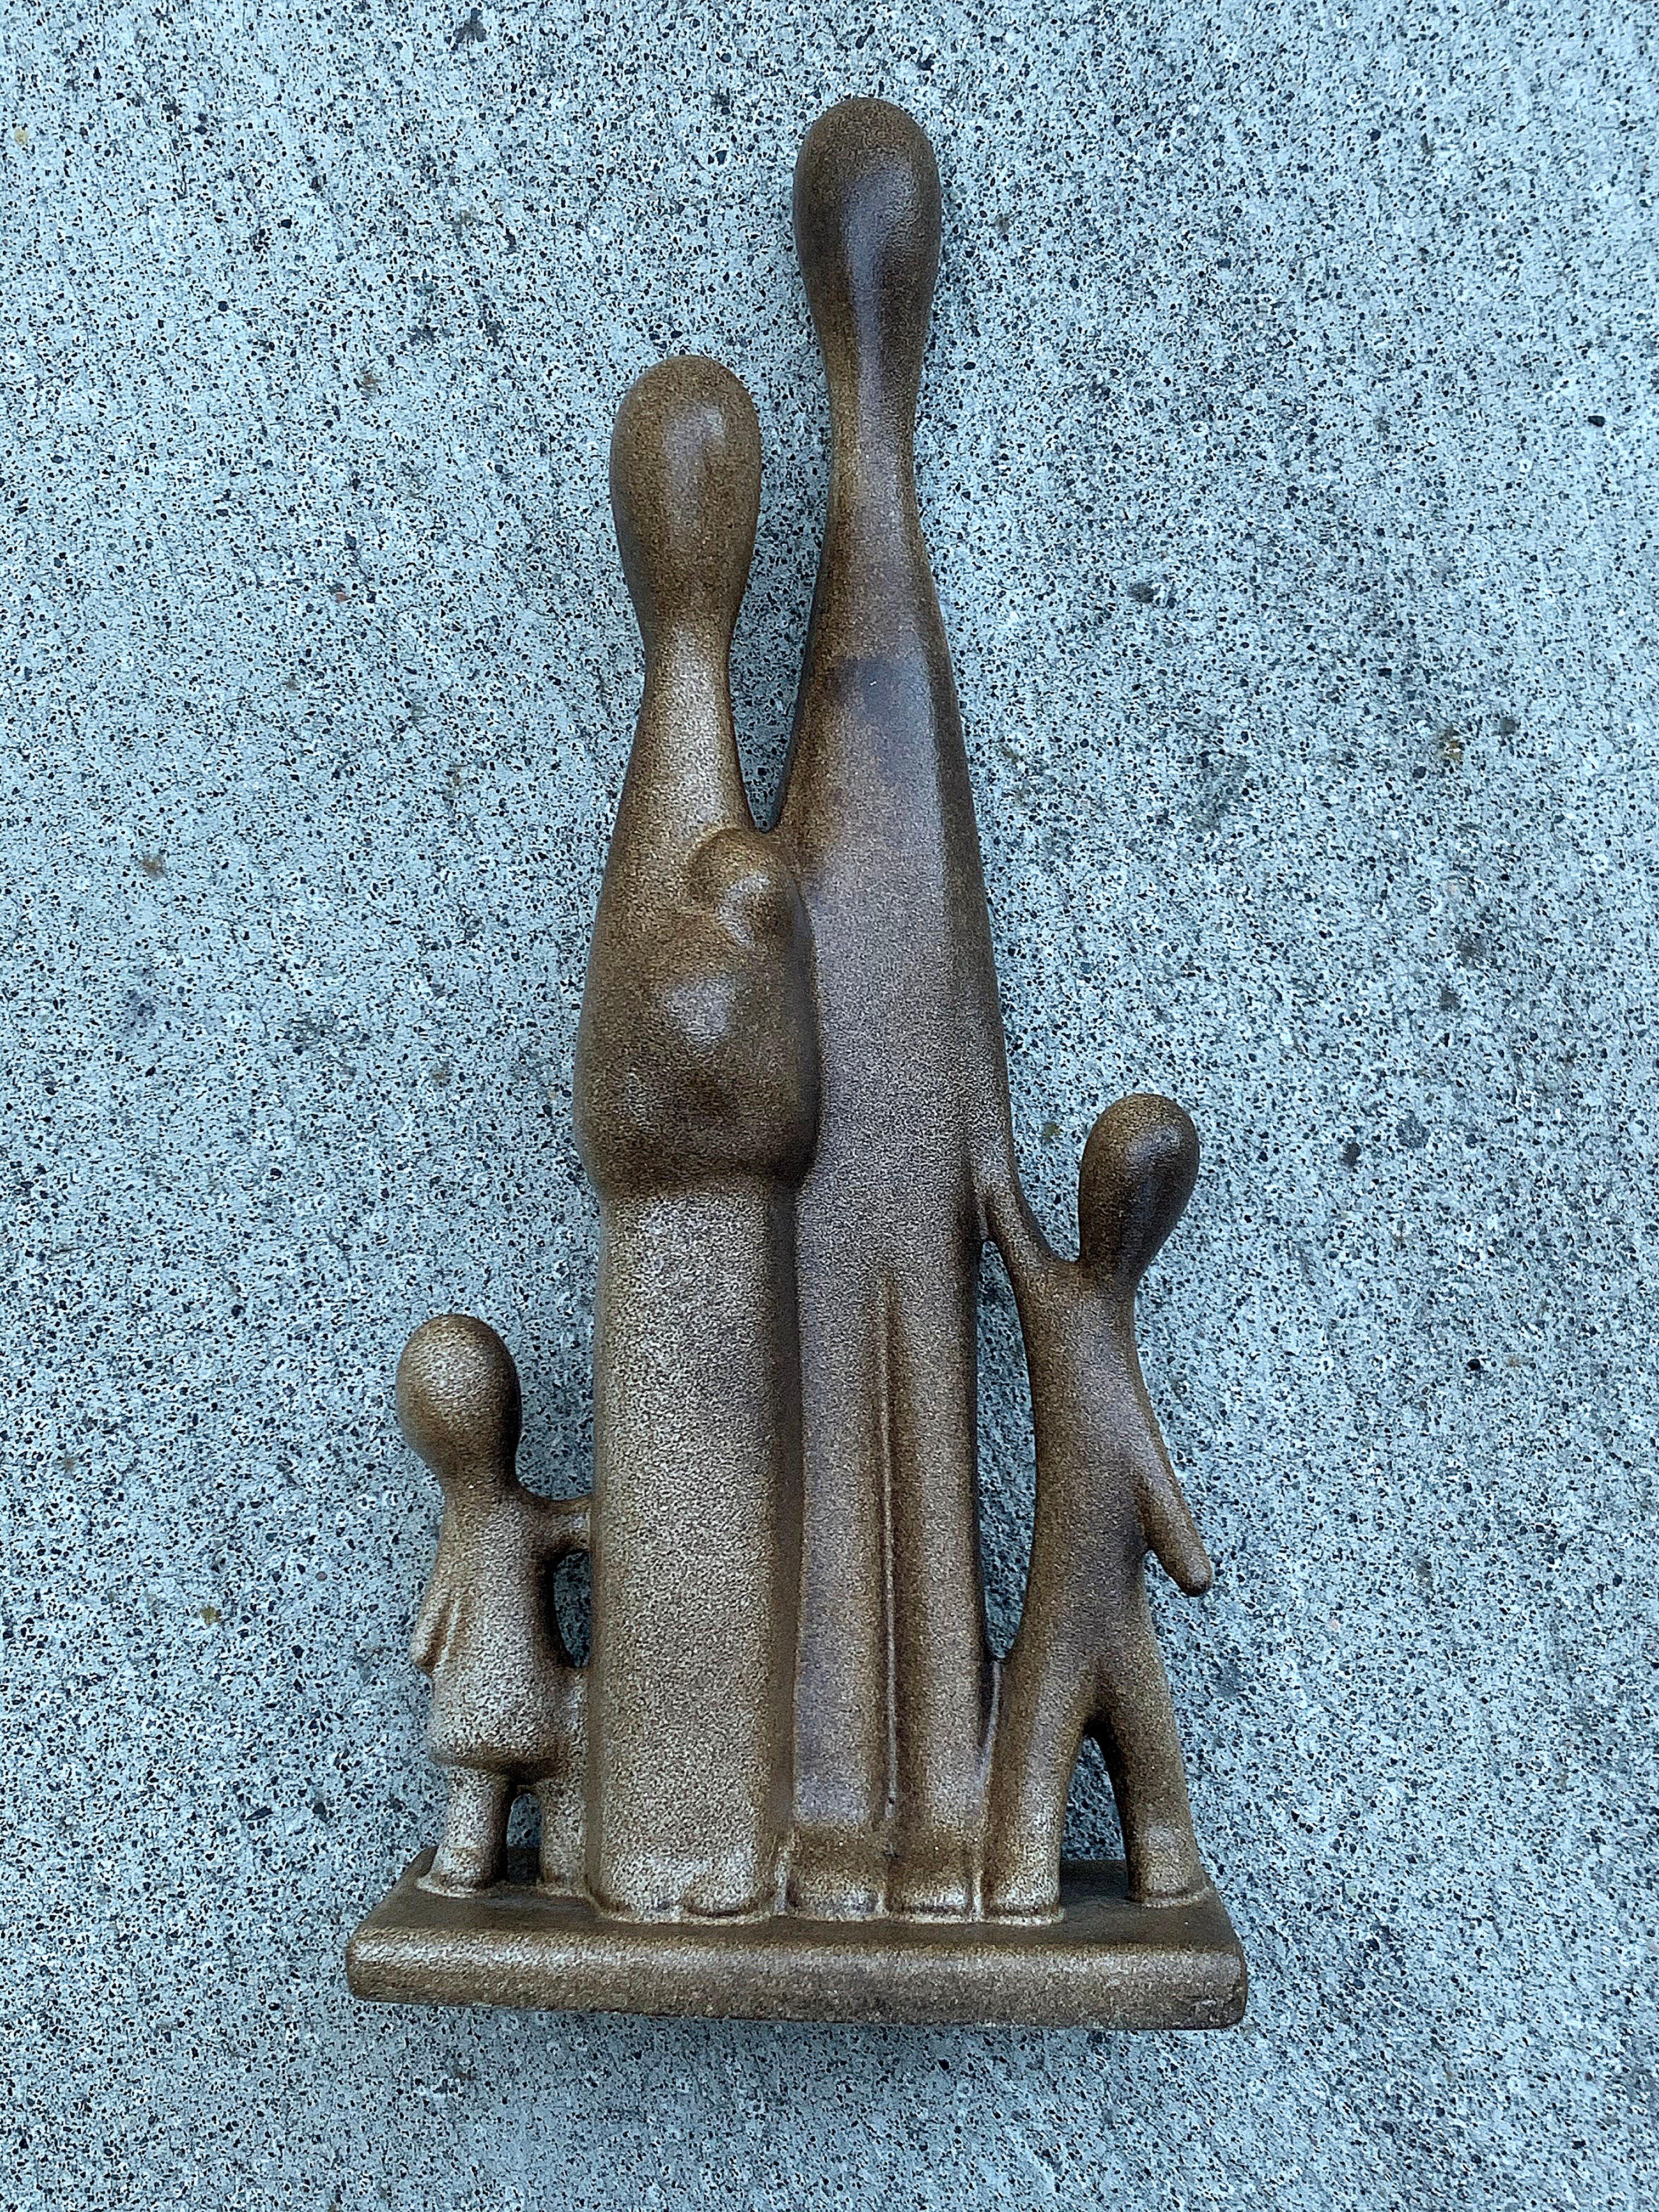 Family of five ceramic sculpture by Howard Pierce. Howard Pierce graduated from the Art Institute of Chicago, later moving to California where he attended Pomona College. Matte brown finish glaze. This piece is stamped with the artist's name at